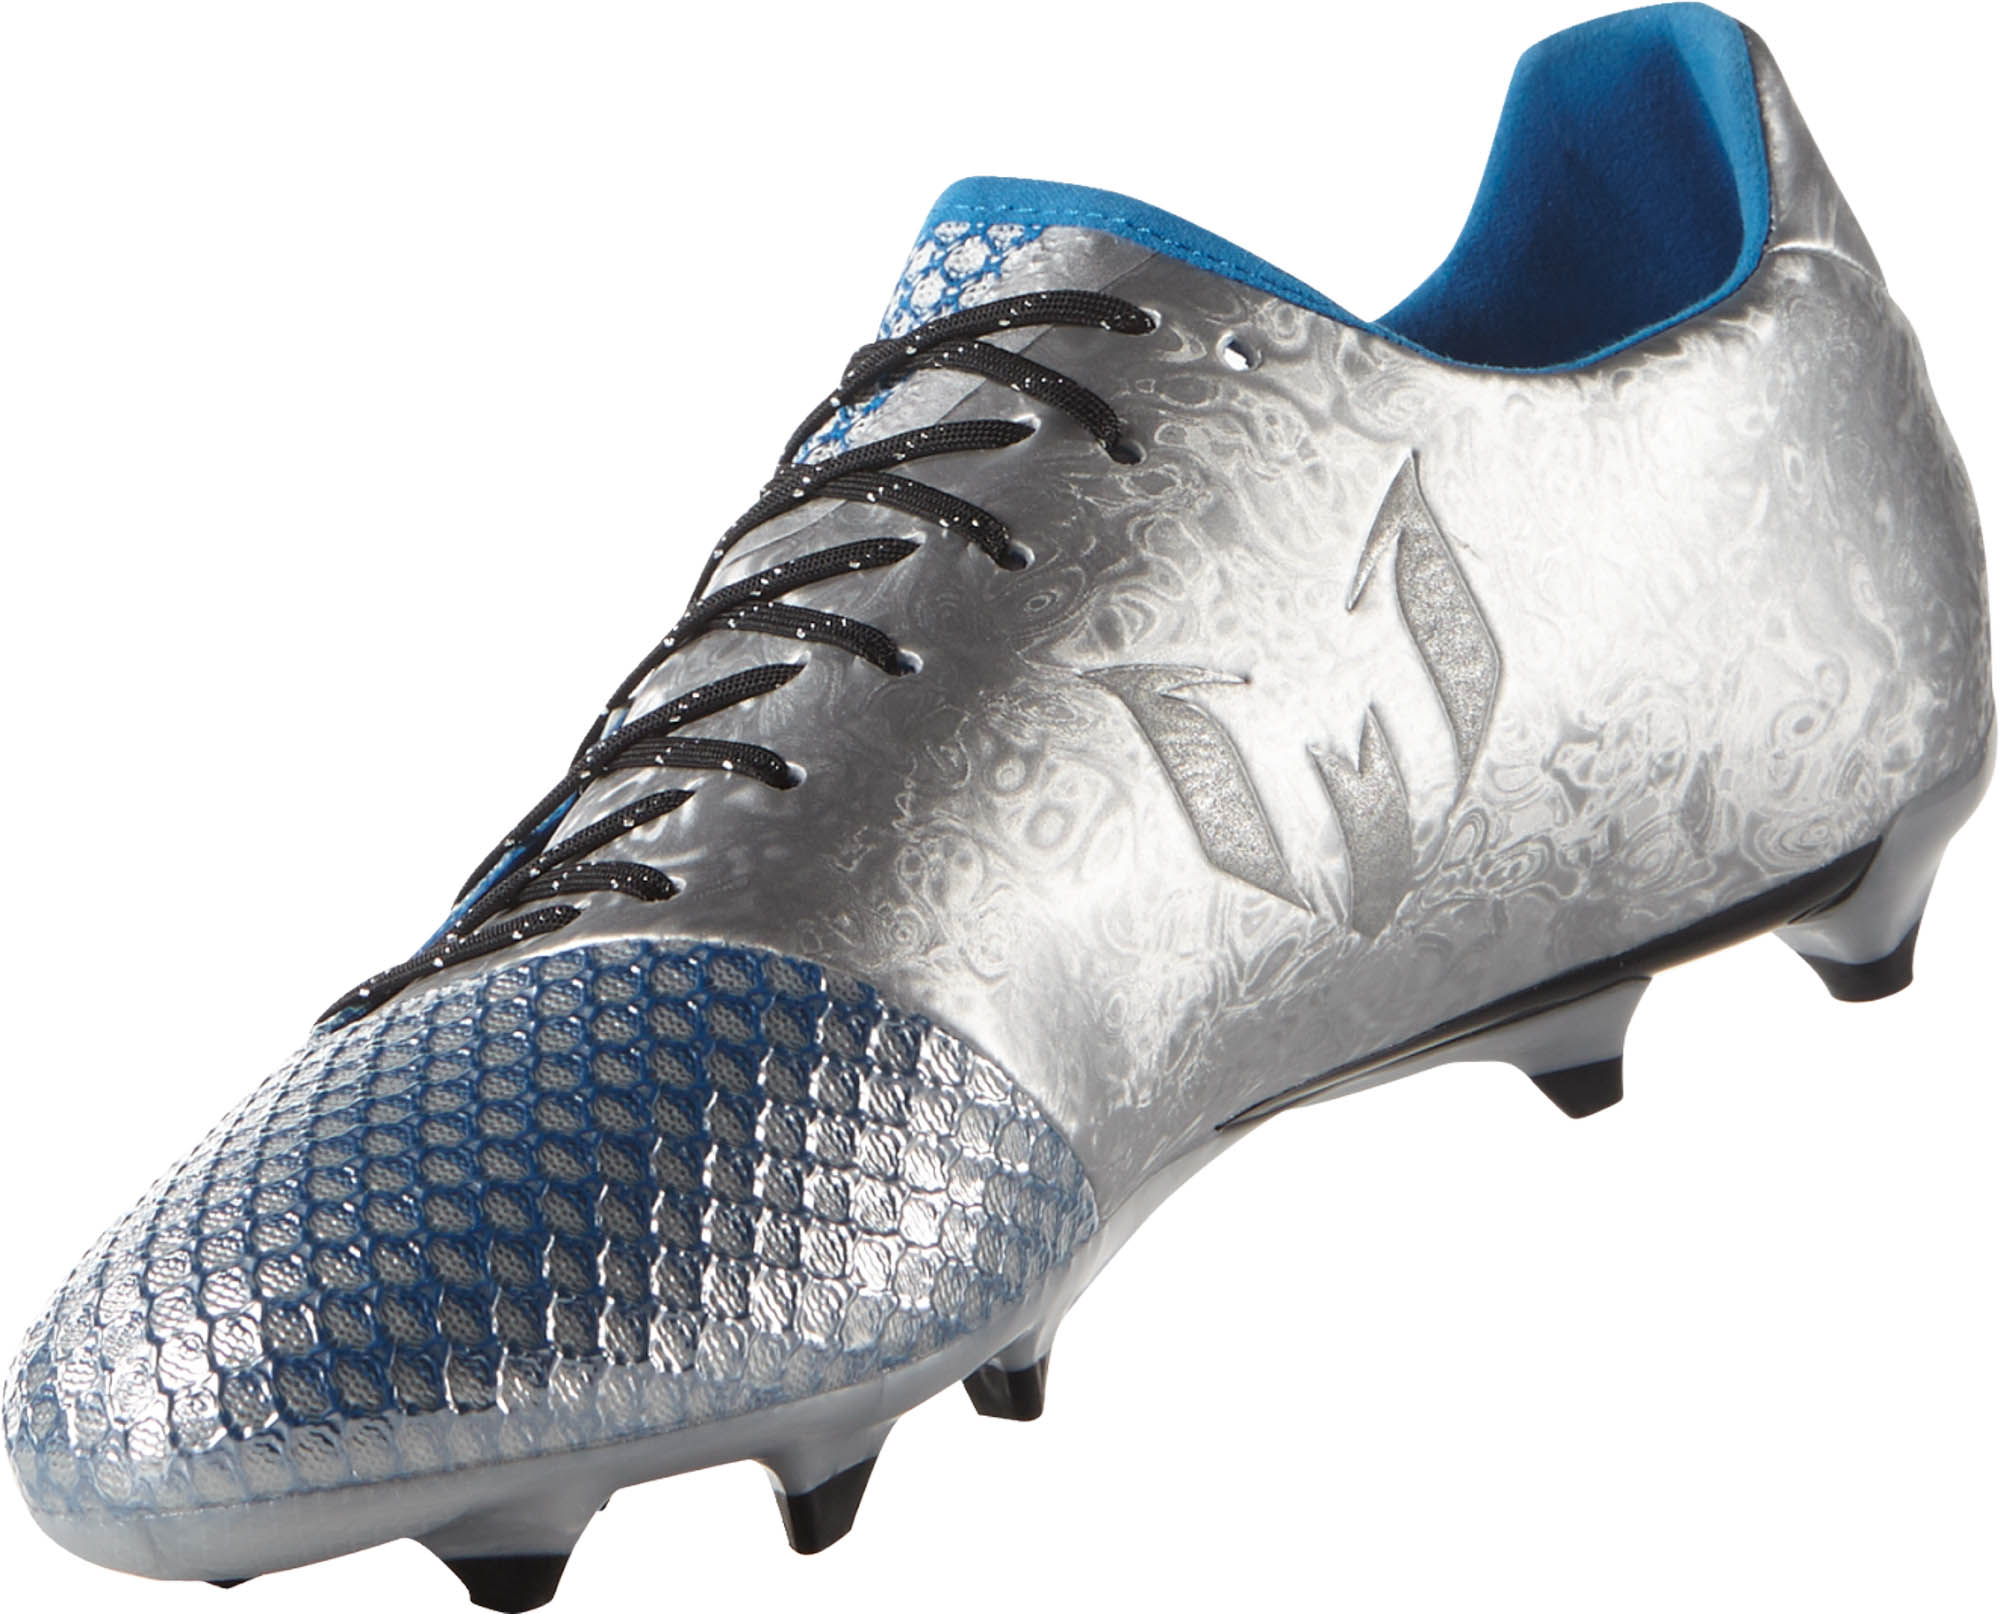 messi 16.2 boots